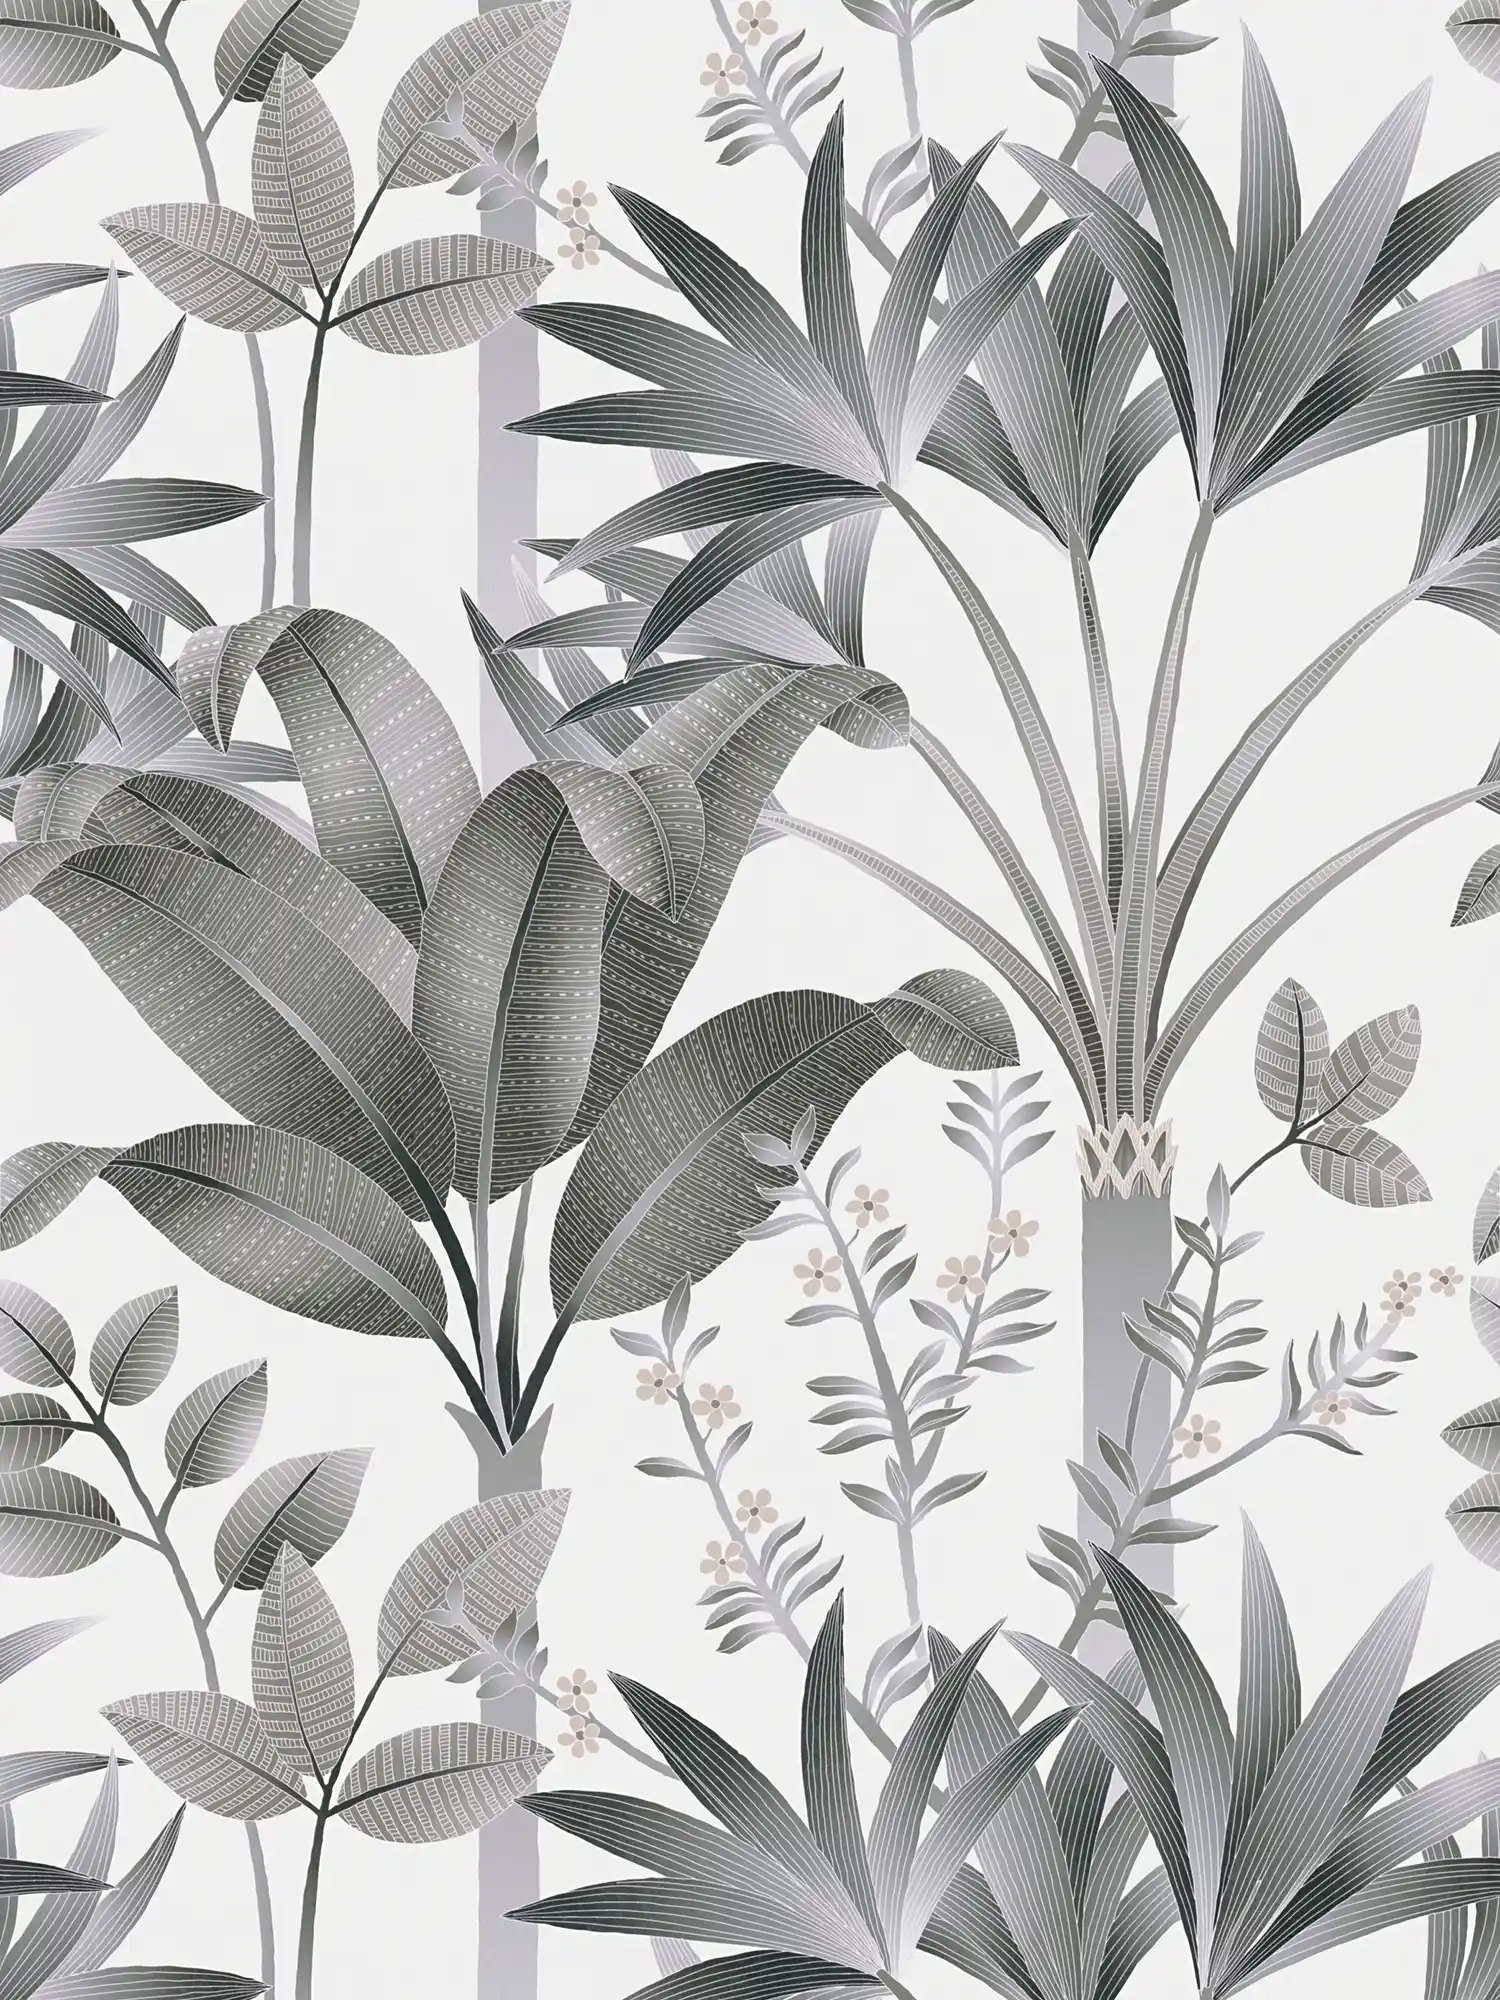 Floral non-woven wallpaper with leaf pattern - grey, black, white
